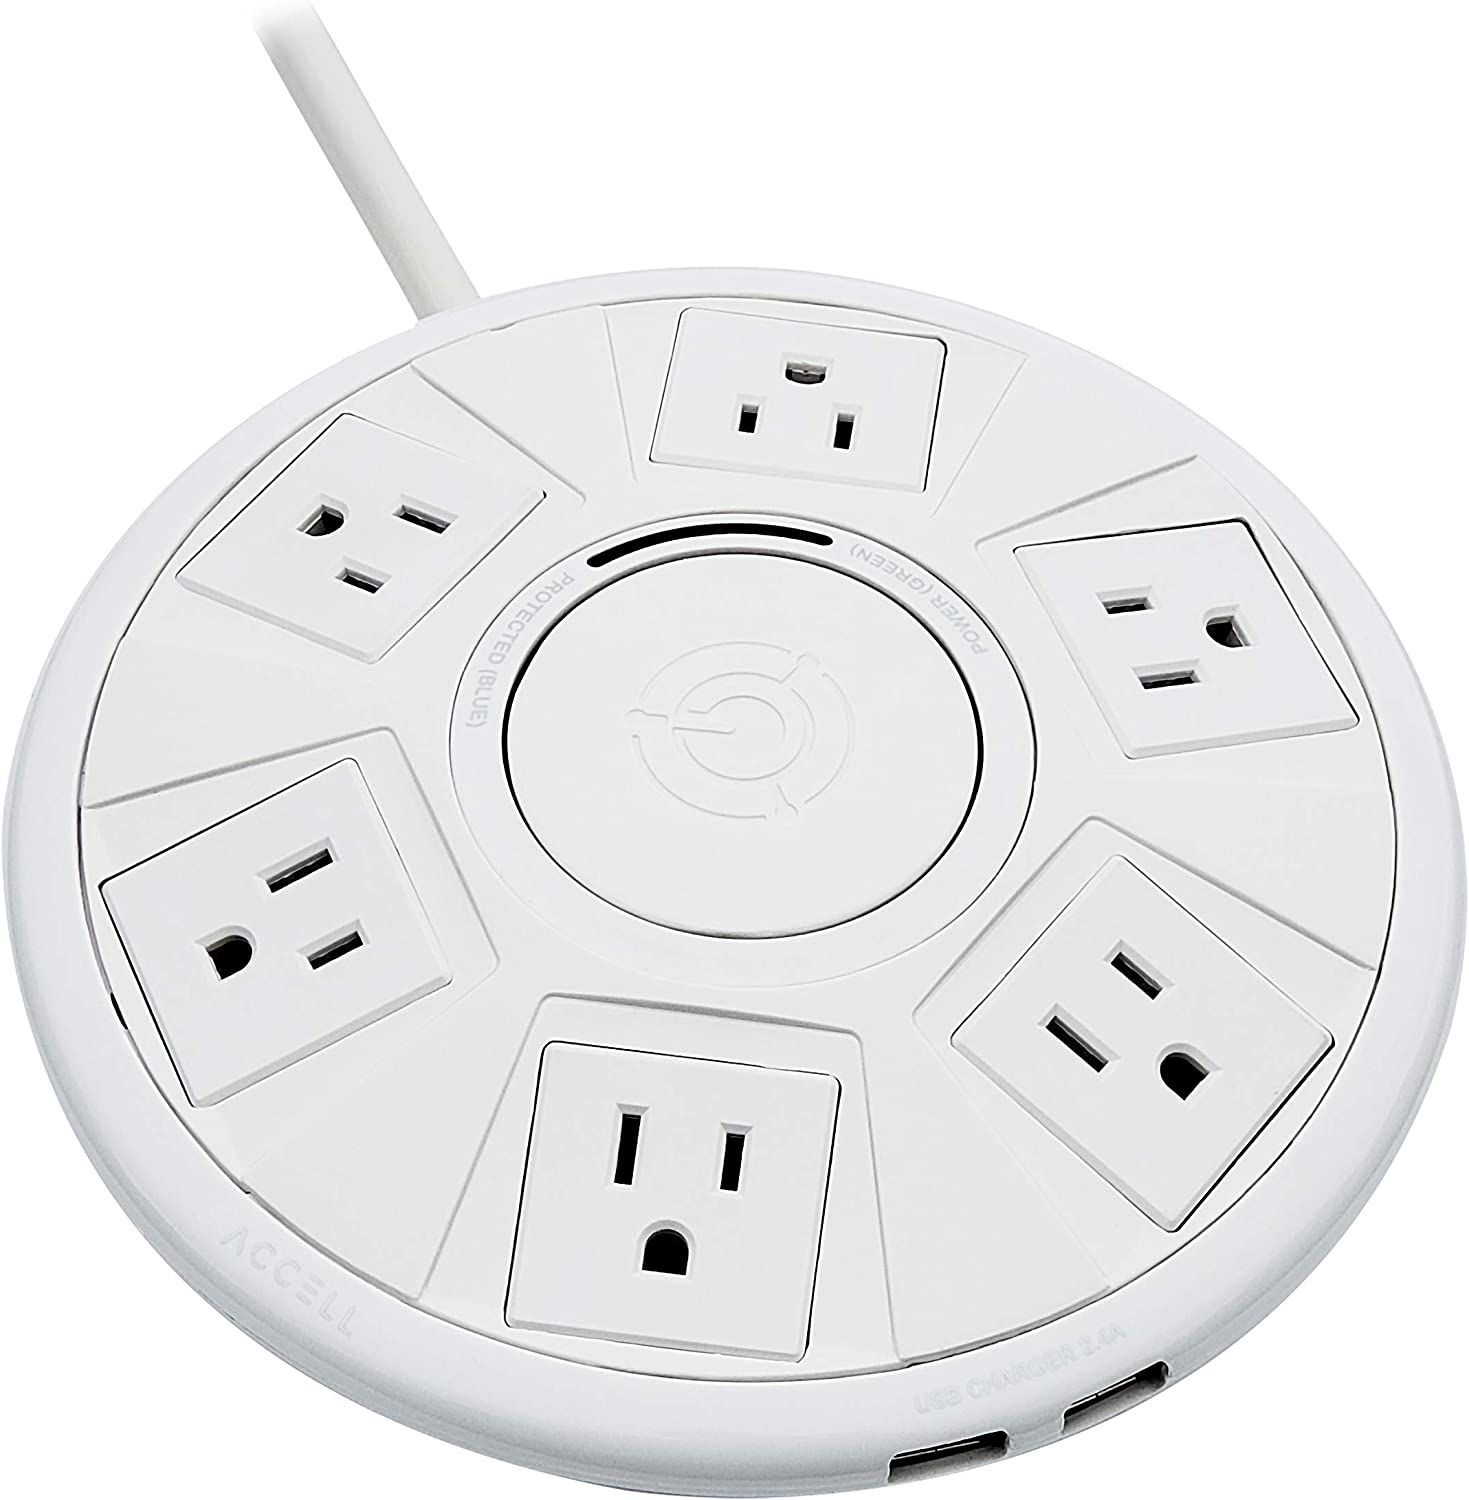 Accell Power Air outlets